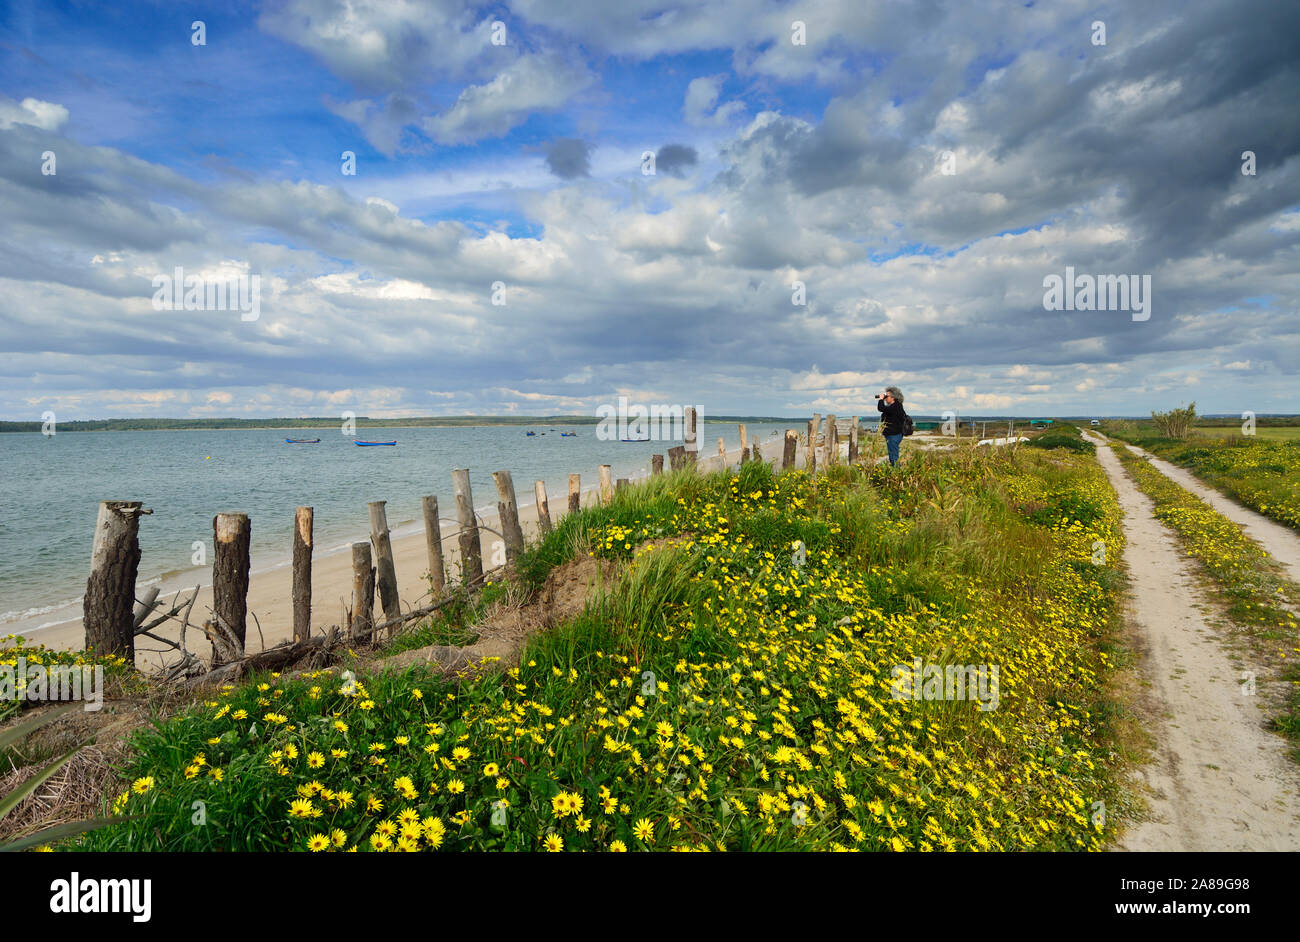 Birdwatching on the banks of the Sado river. Alcácer do Sal, Portugal Stock Photo